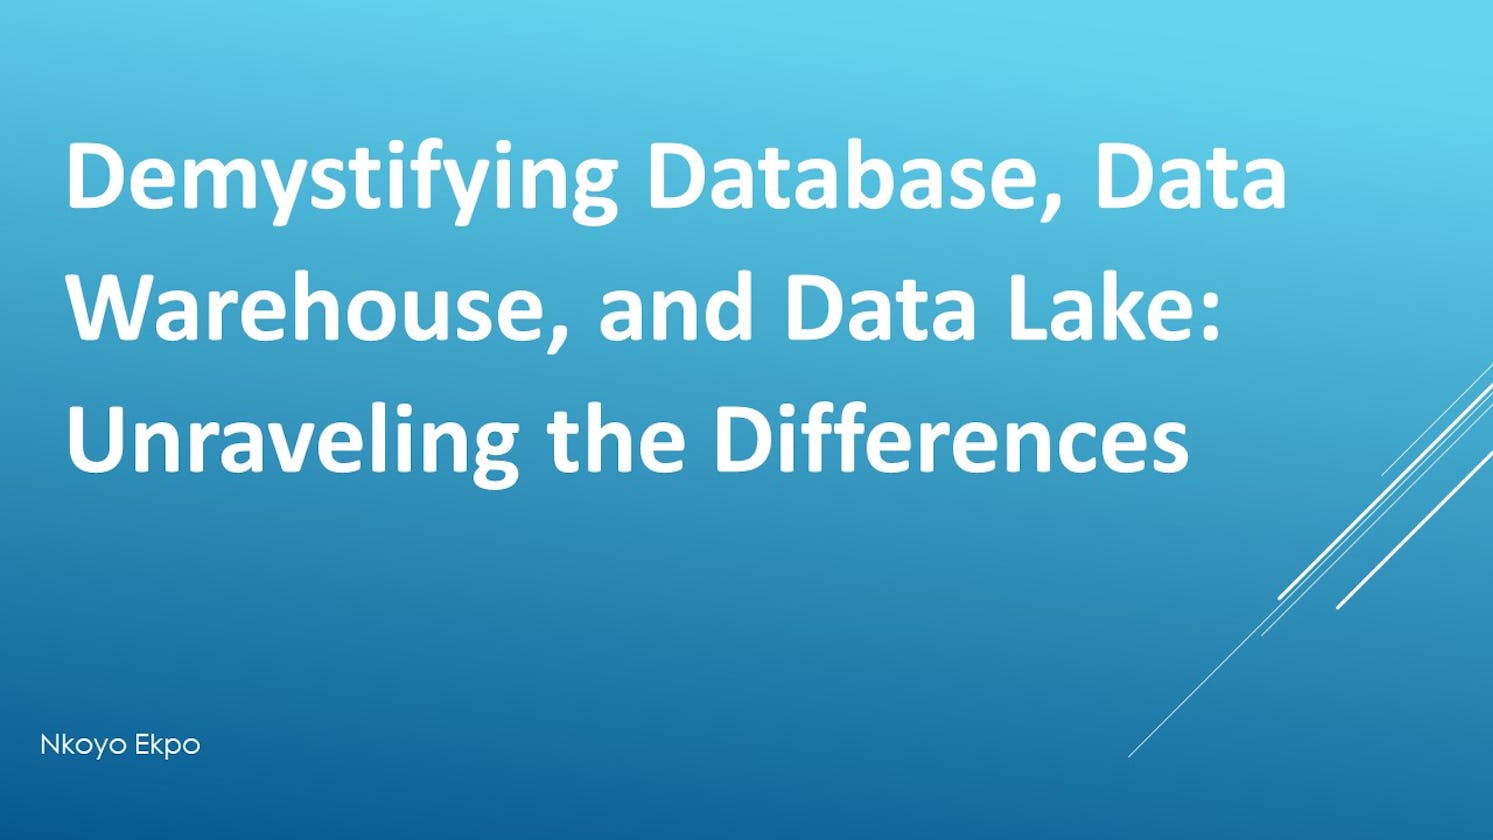 Demystifying Database, Data Warehouse, and Data Lake: Unraveling the Differences